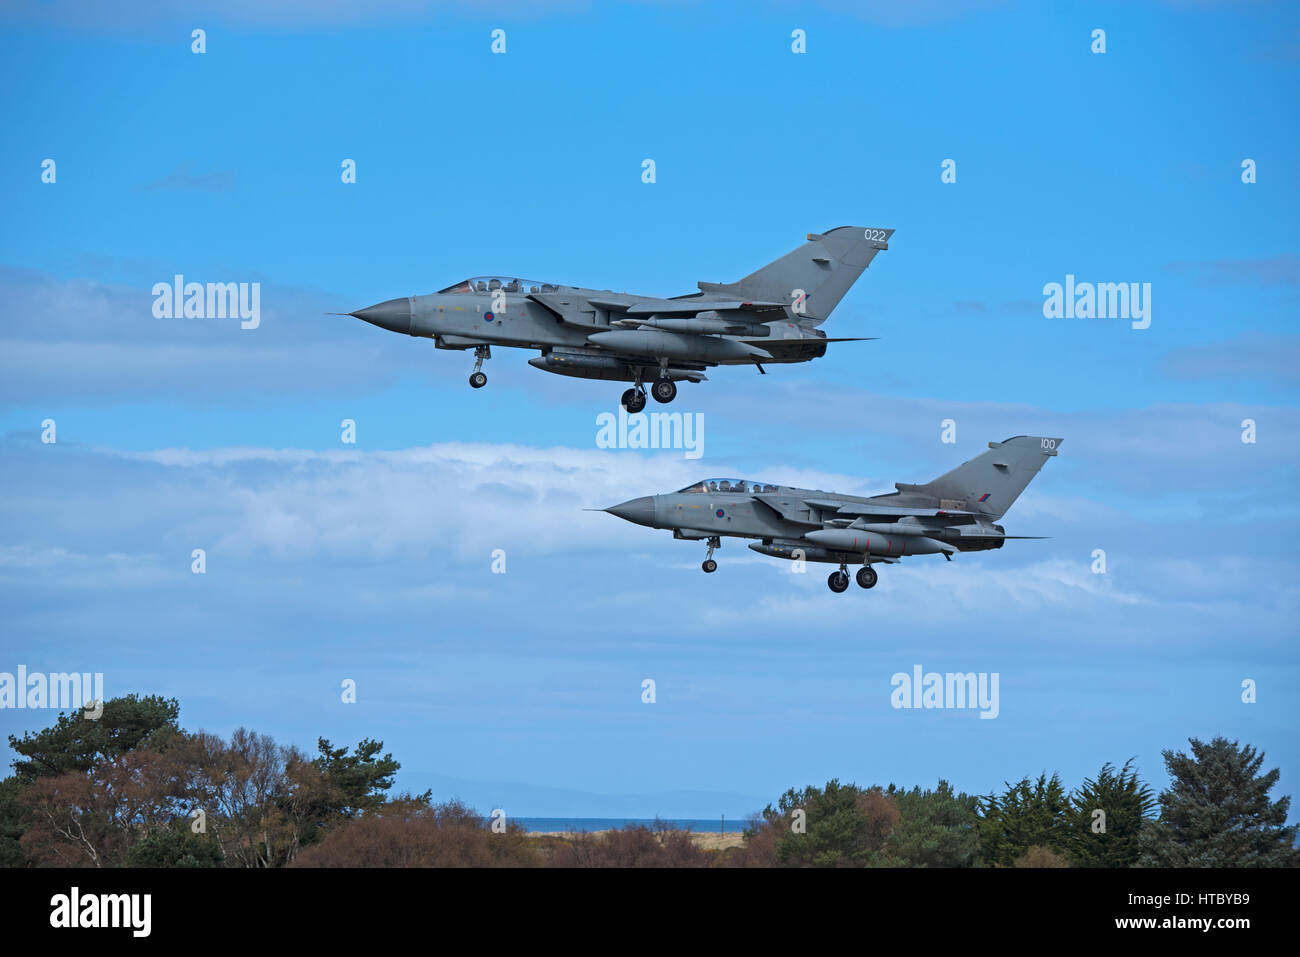 A pair of RAF GR4 Tornados returning to their home base at RAF Lossiemouth in Morayshire, North East Scotland. Stock Photo